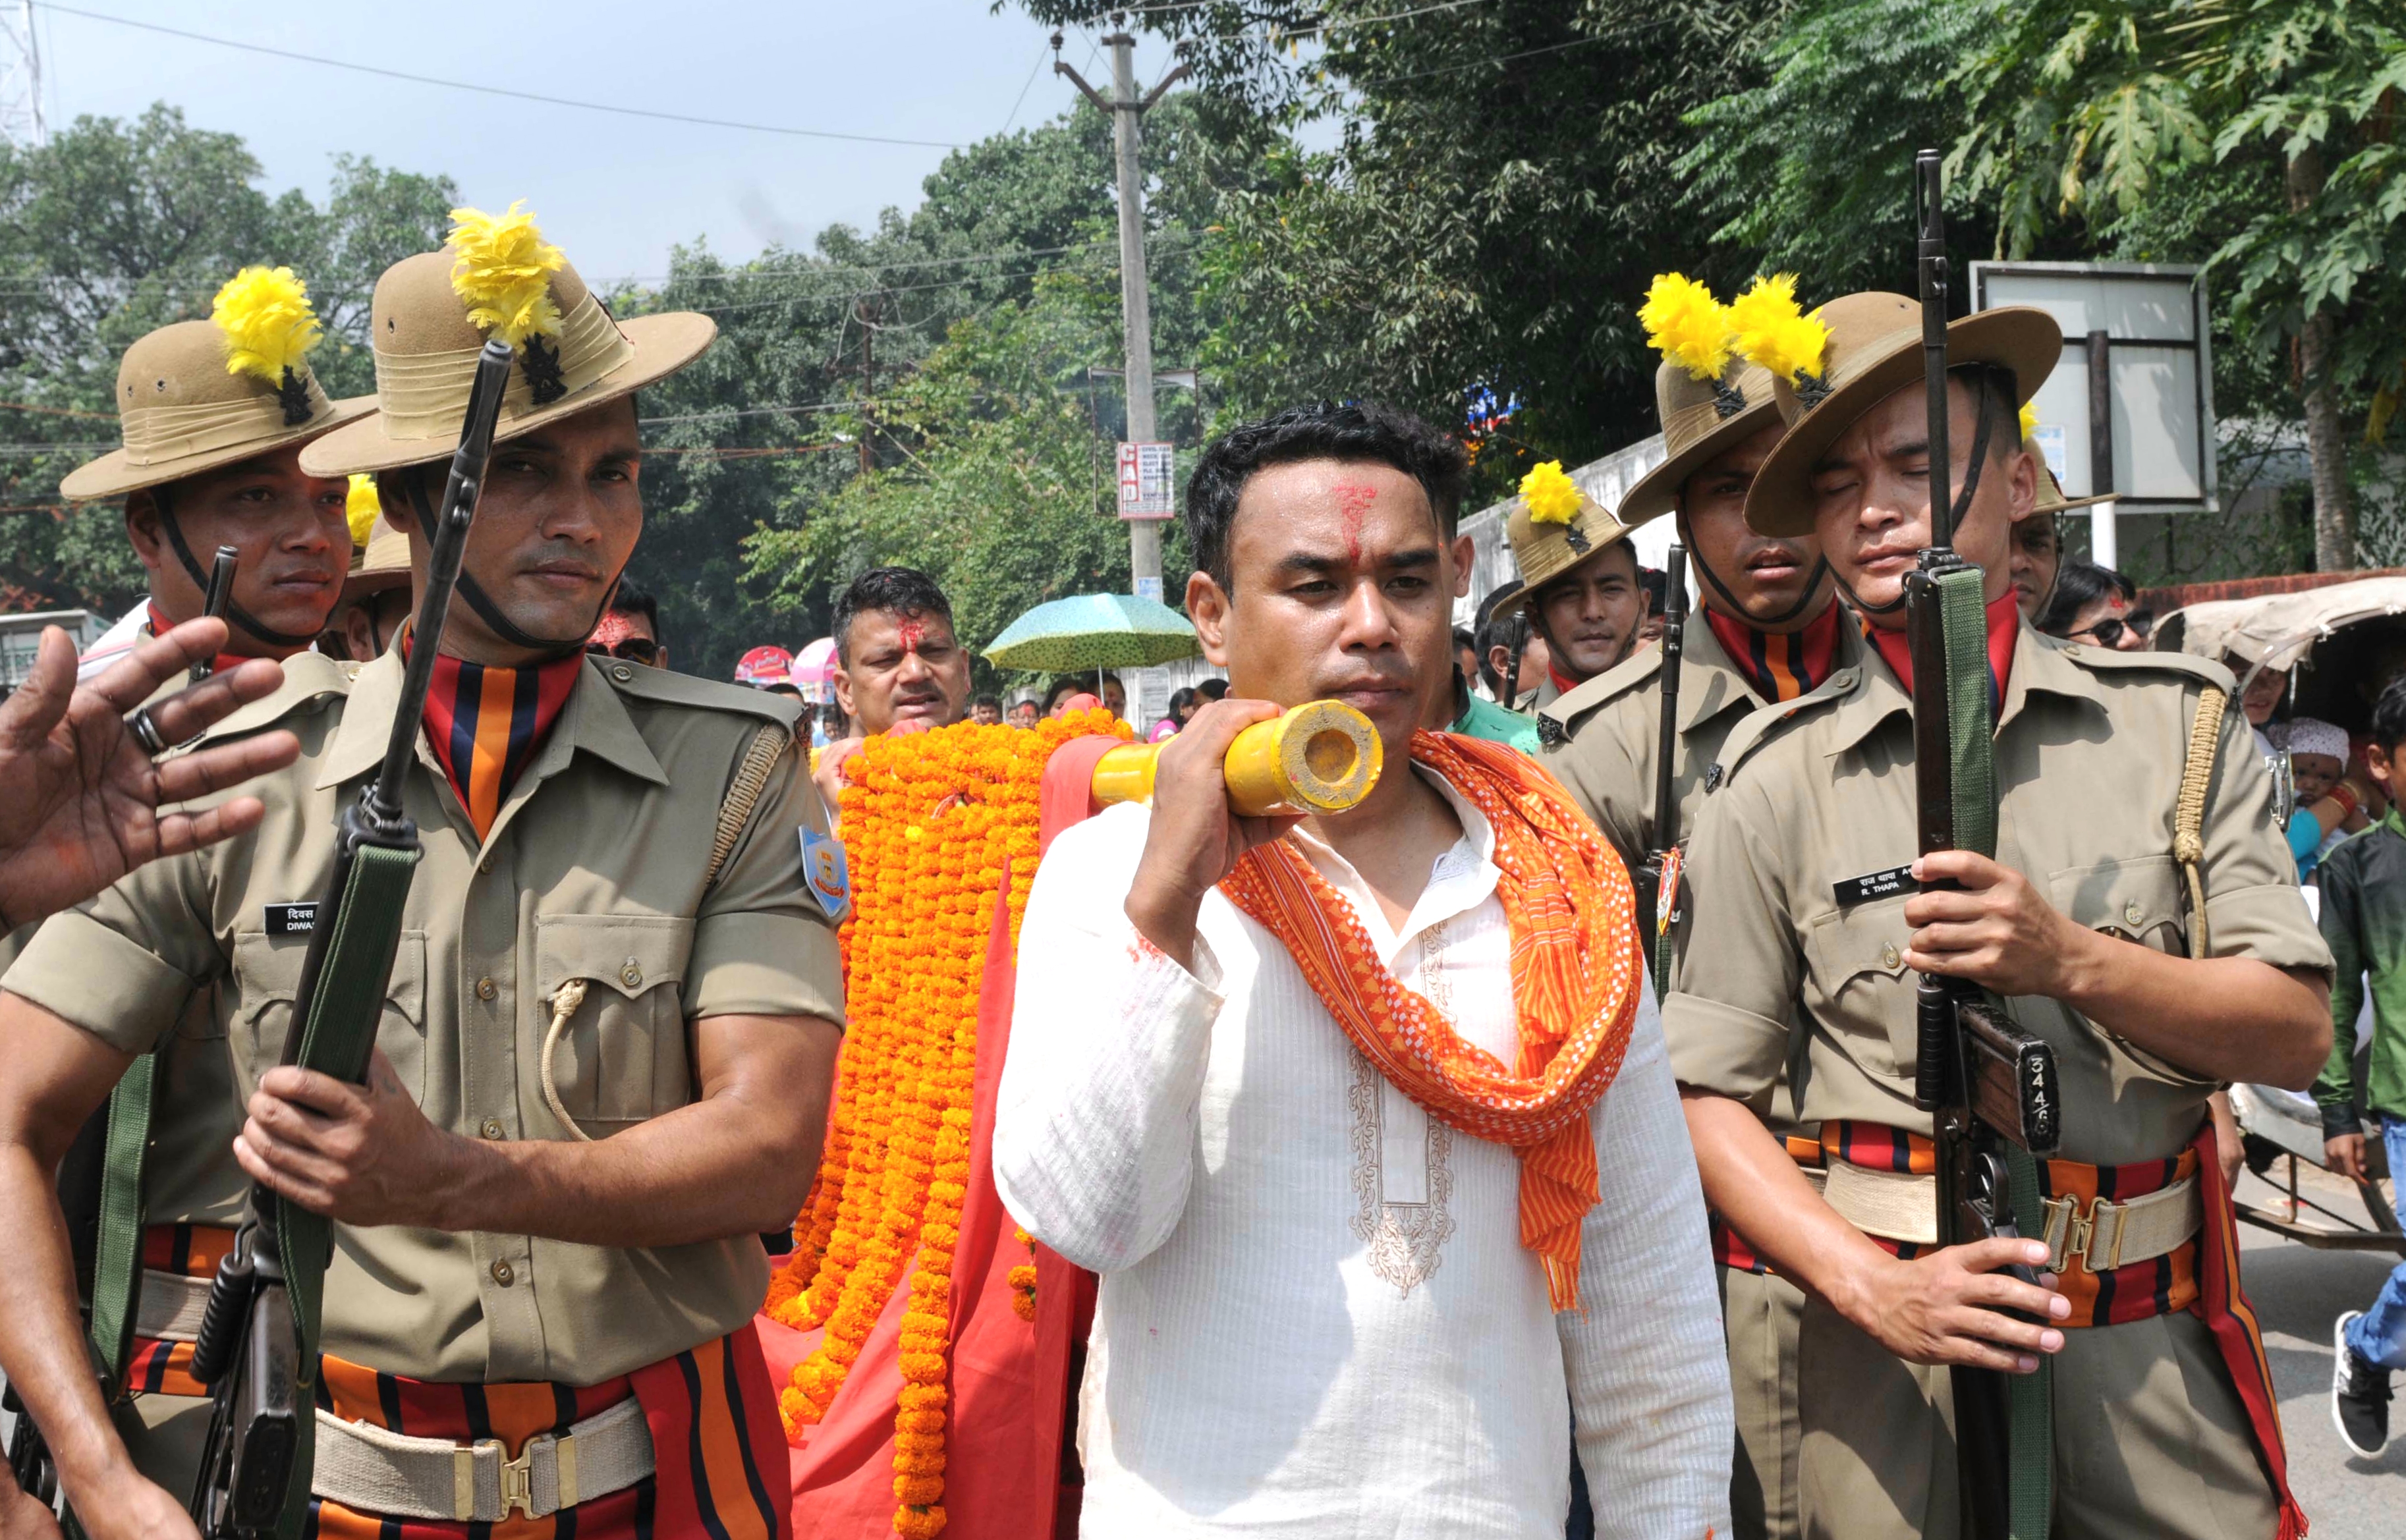 Mahasapatmi :: Jharkhand Armed Police forces participate in a Doli Yatra